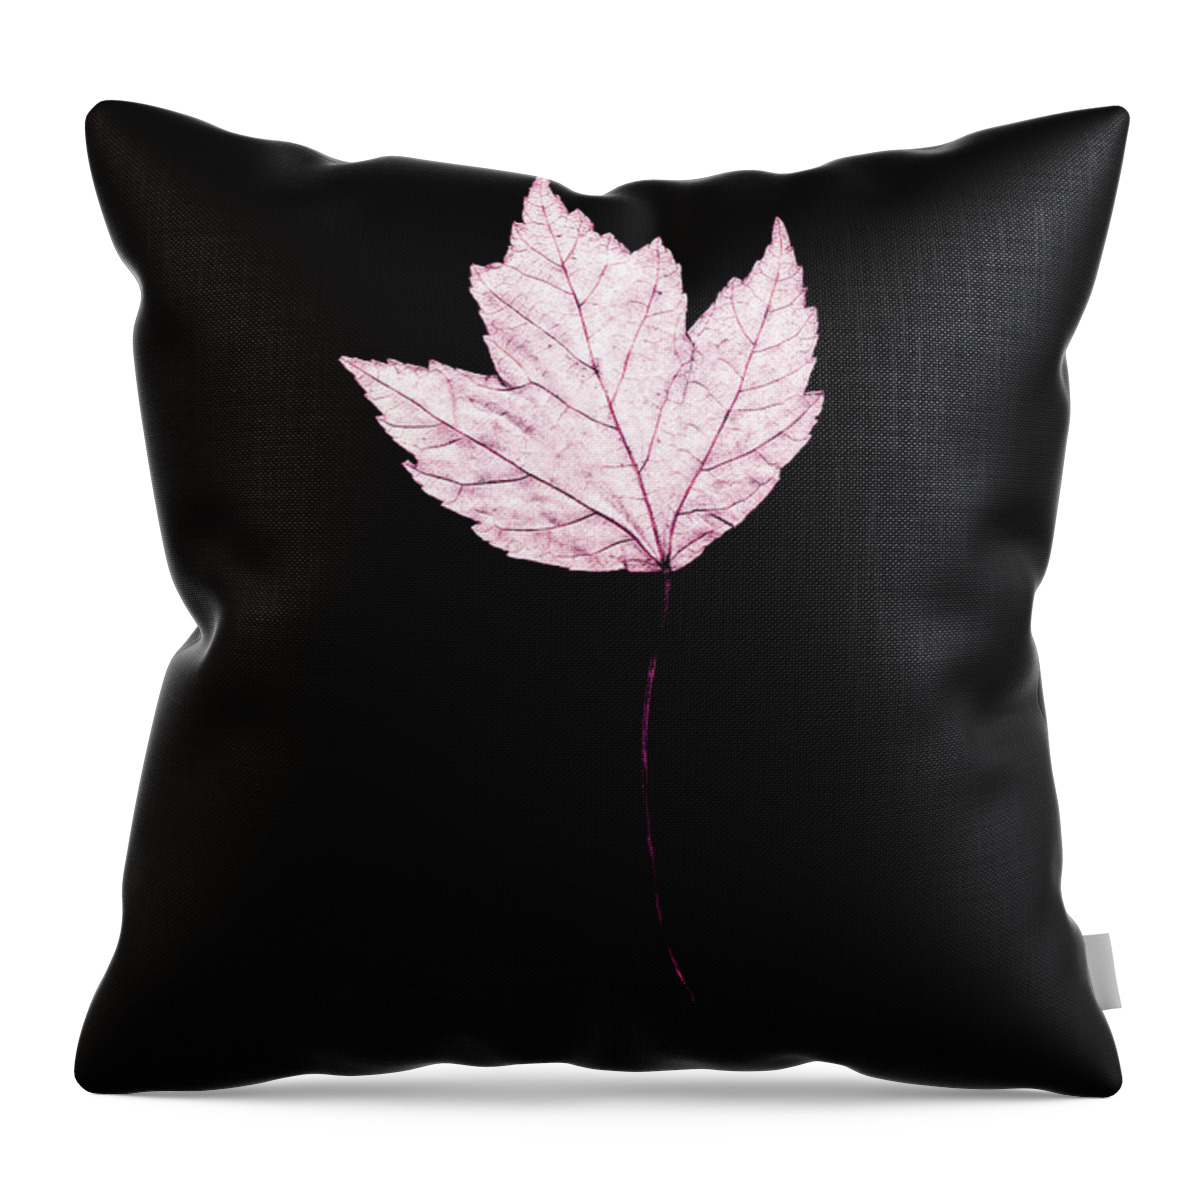 Lavender Throw Pillow featuring the photograph Lavender Leaf on Black by Connie Fox